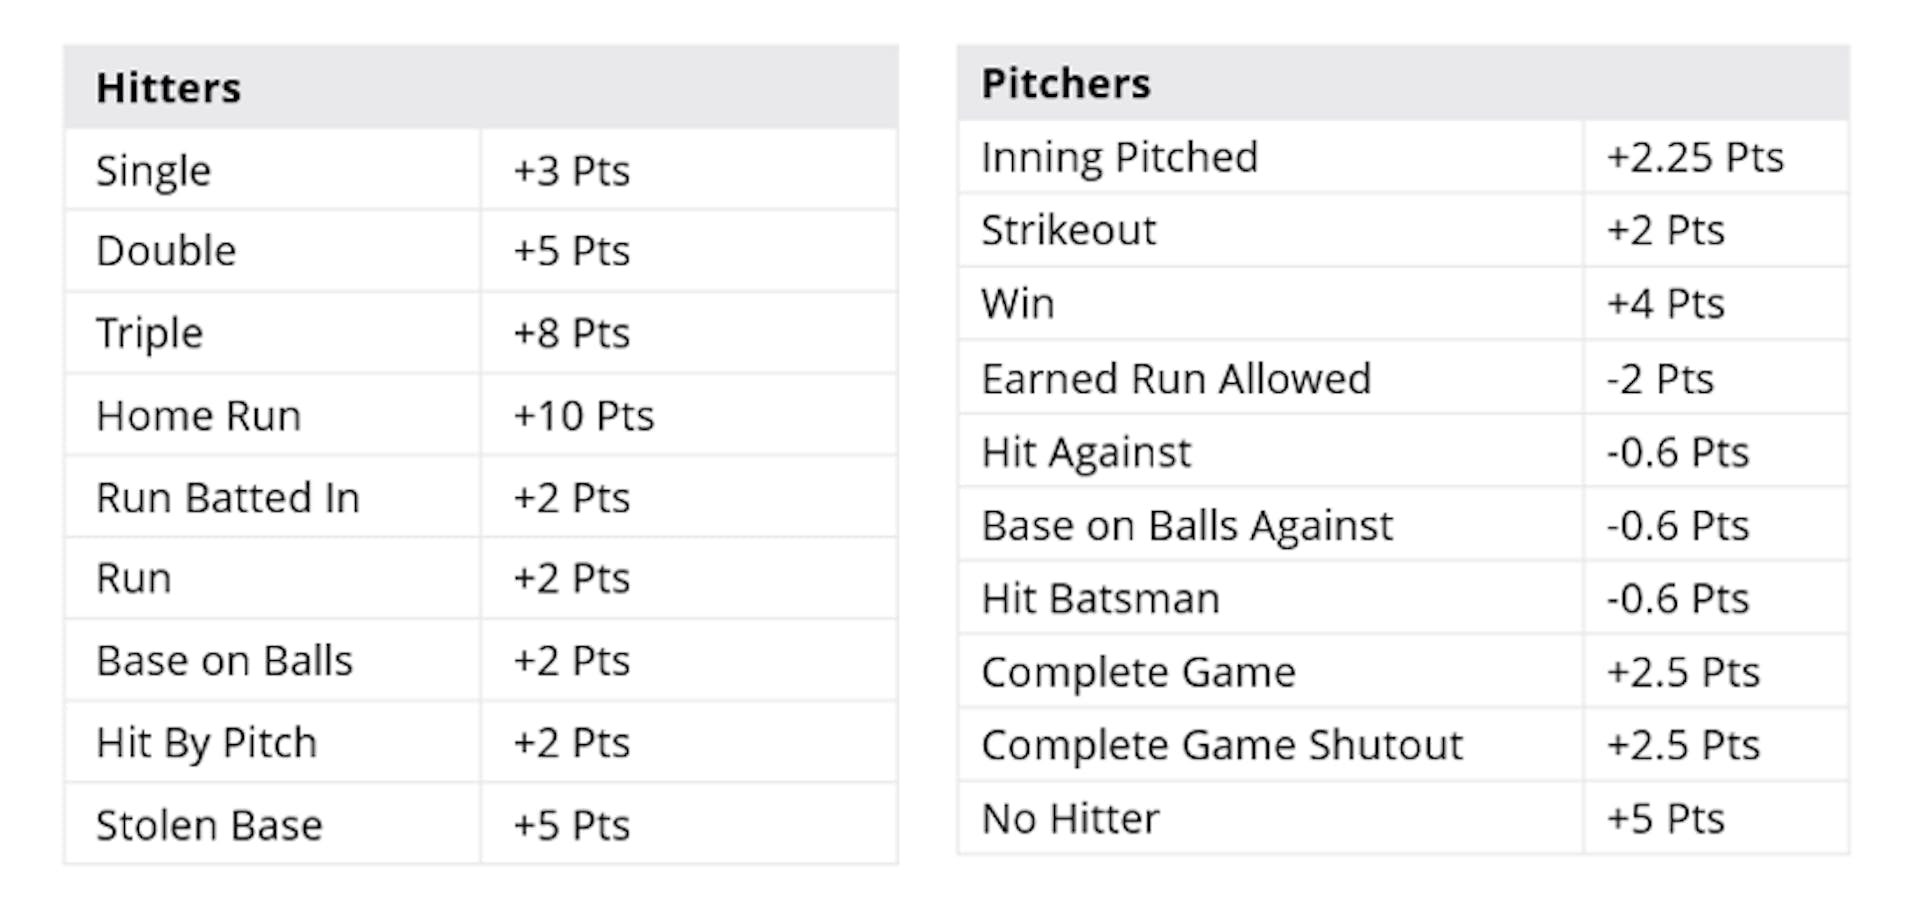 Image by Author: Typical classic scoring template used by online fantasy baseball providers.